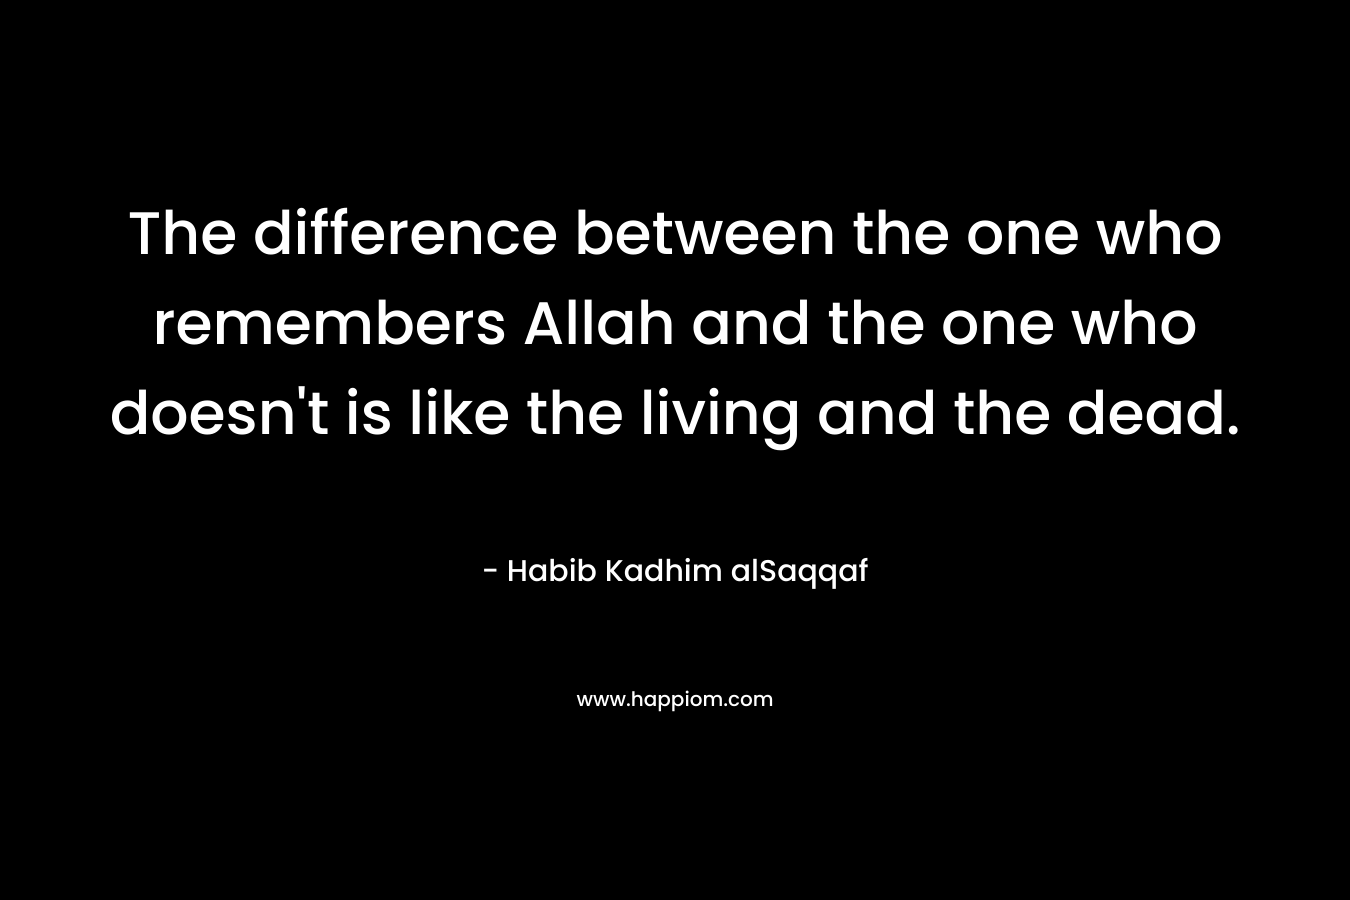 The difference between the one who remembers Allah and the one who doesn’t is like the living and the dead. – Habib Kadhim alSaqqaf